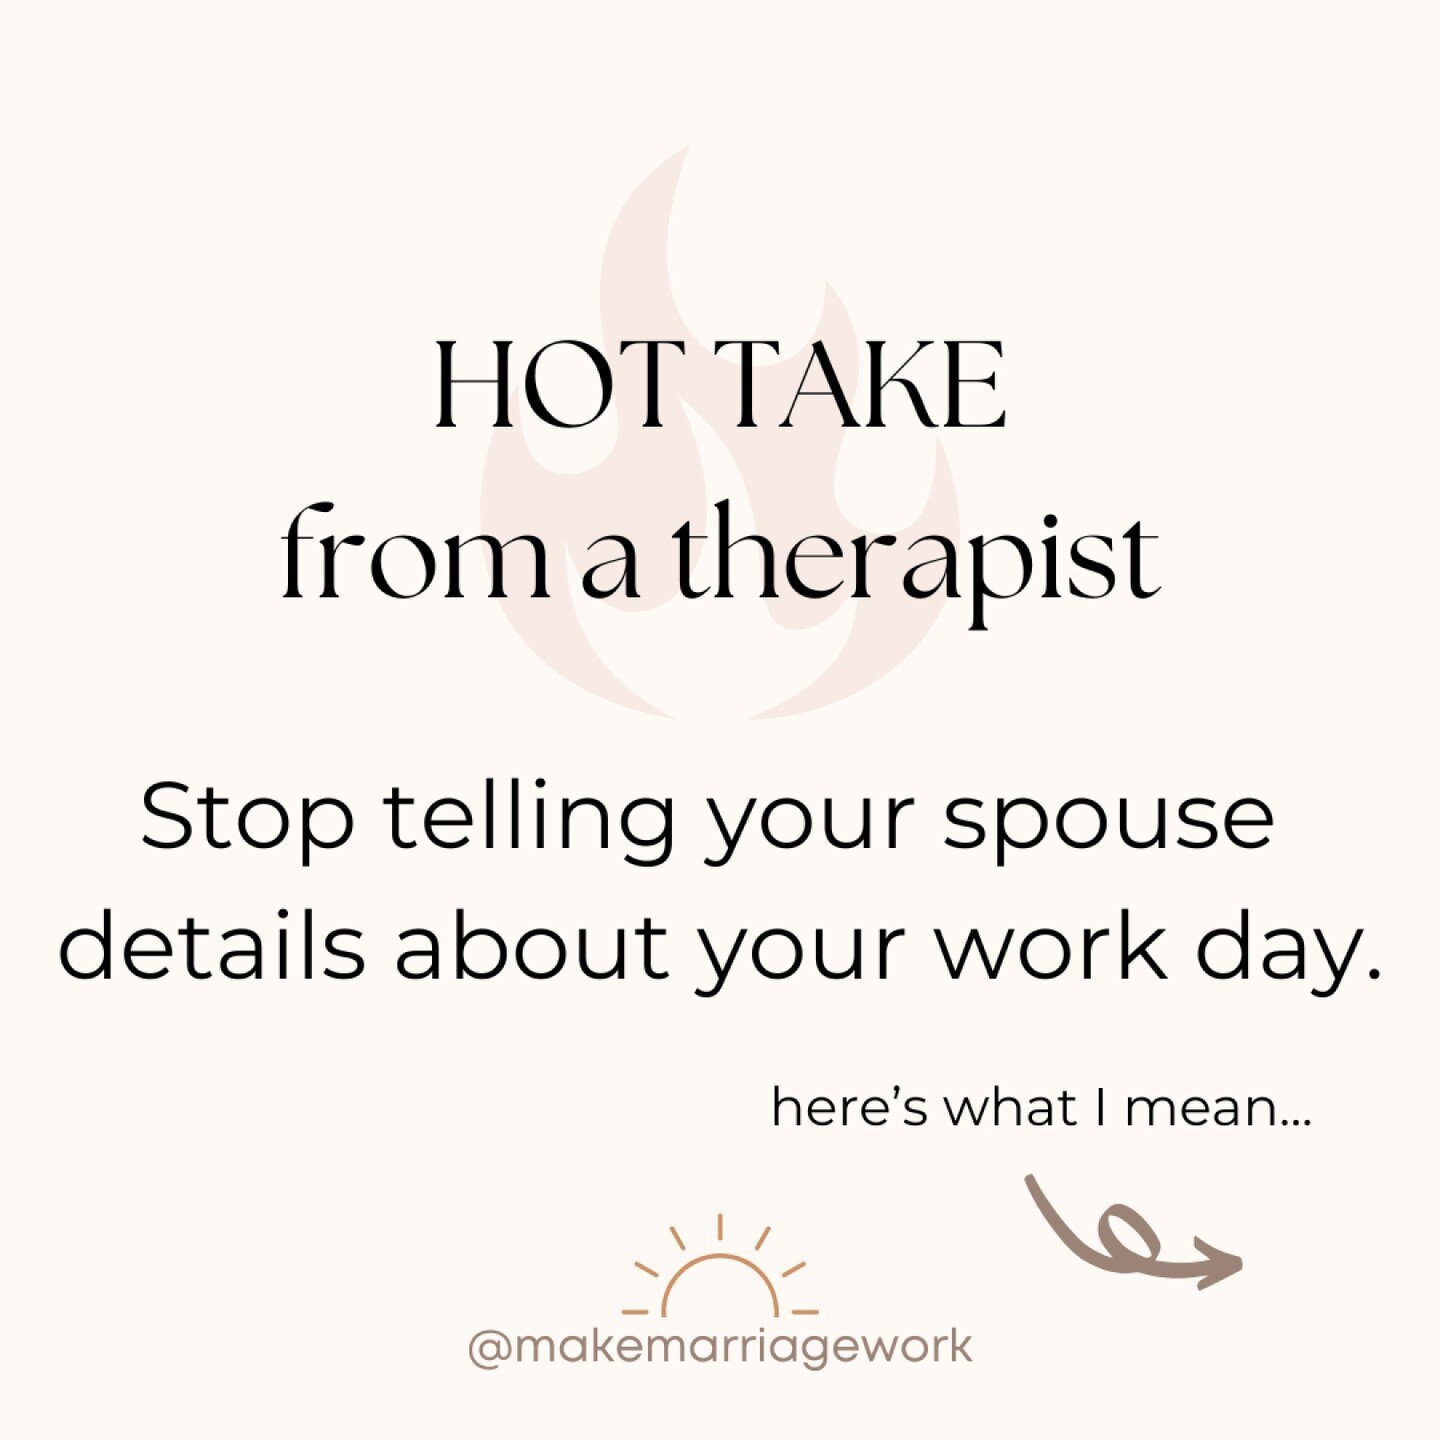 Have you ever tried venting about your work day to your partner and ended up feeling worse, not better? 

Sometimes that's because we are craving connection rather than logistic help or understanding, and it's easy to get lost in workplace jargon rat